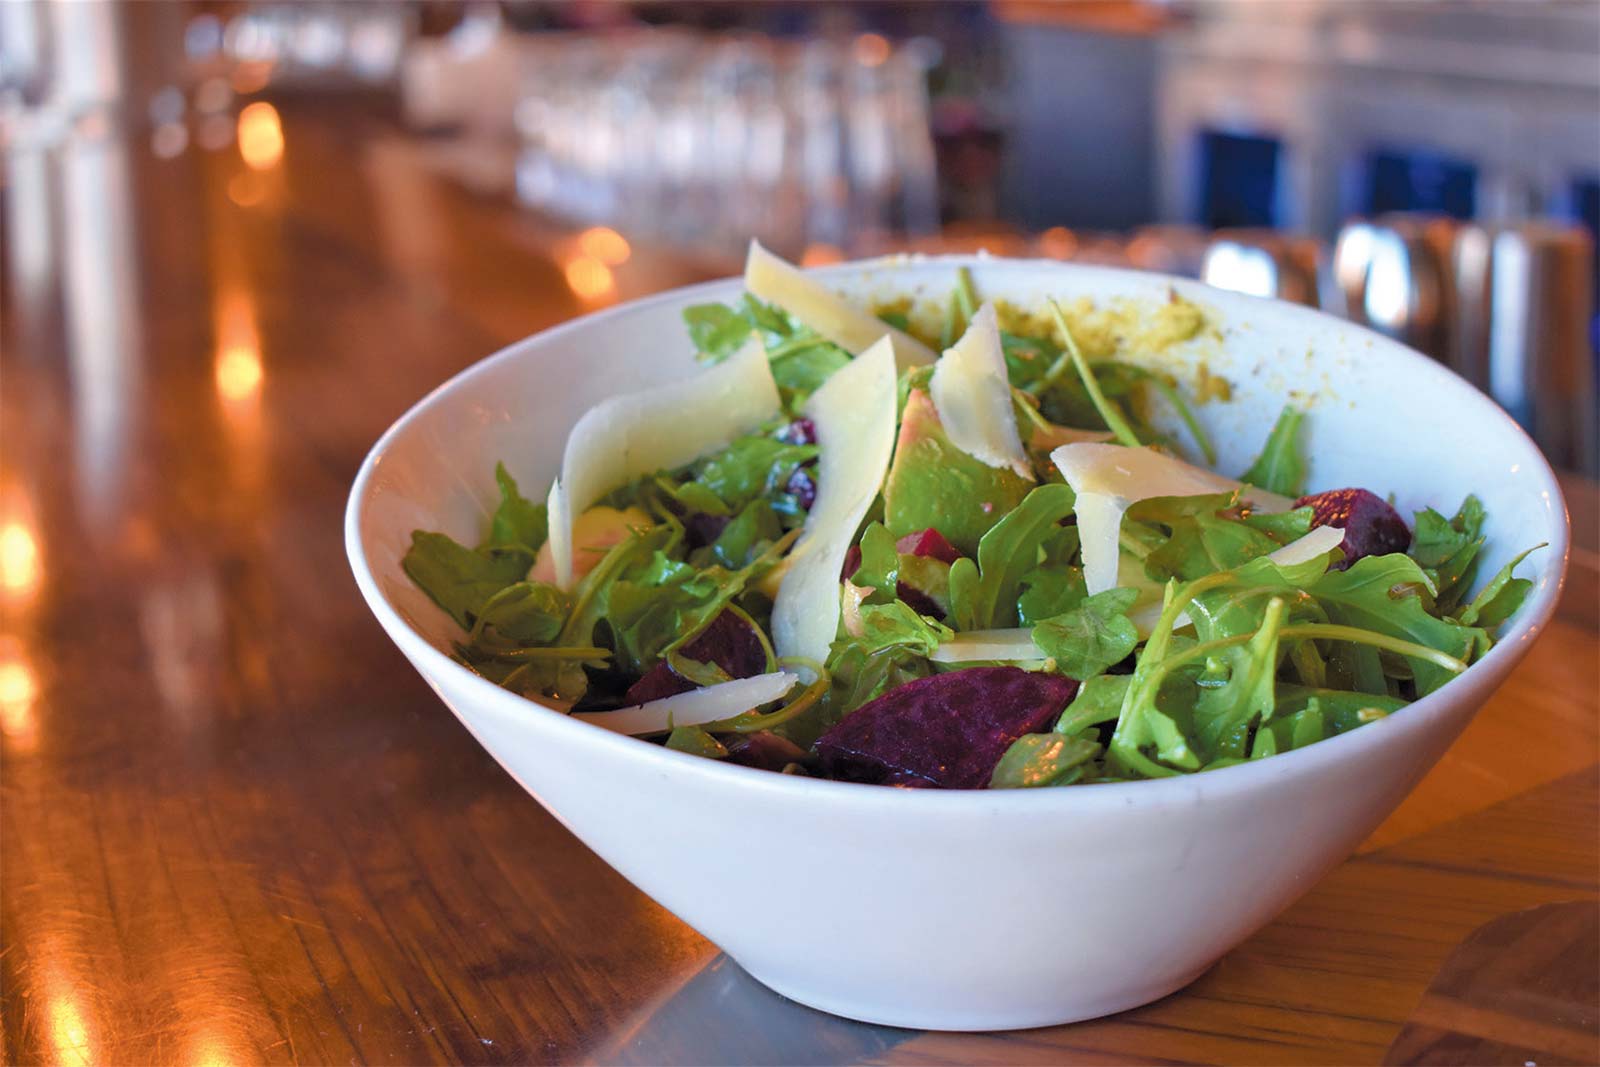 The beet salad offers a balance of spicy arugula, earthy roasted beets, goat cheese, avocado and a sprinkling of pistachios for extra crunch. Contributed photo